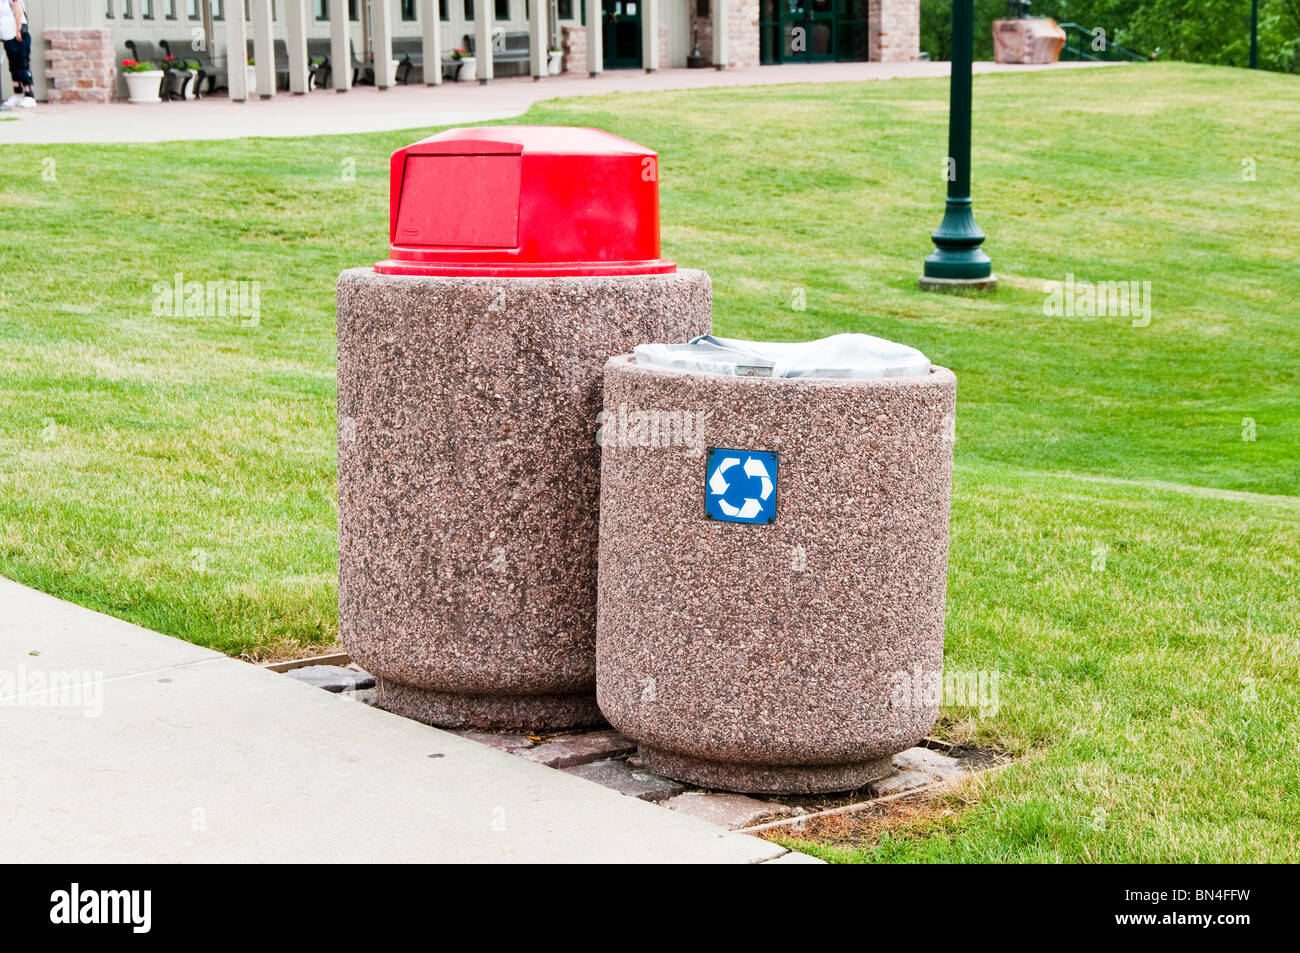 Garbage and recycling cans in a public park conveniently located along the sidewalk to encourage resopnsible behavior. Stock Photo